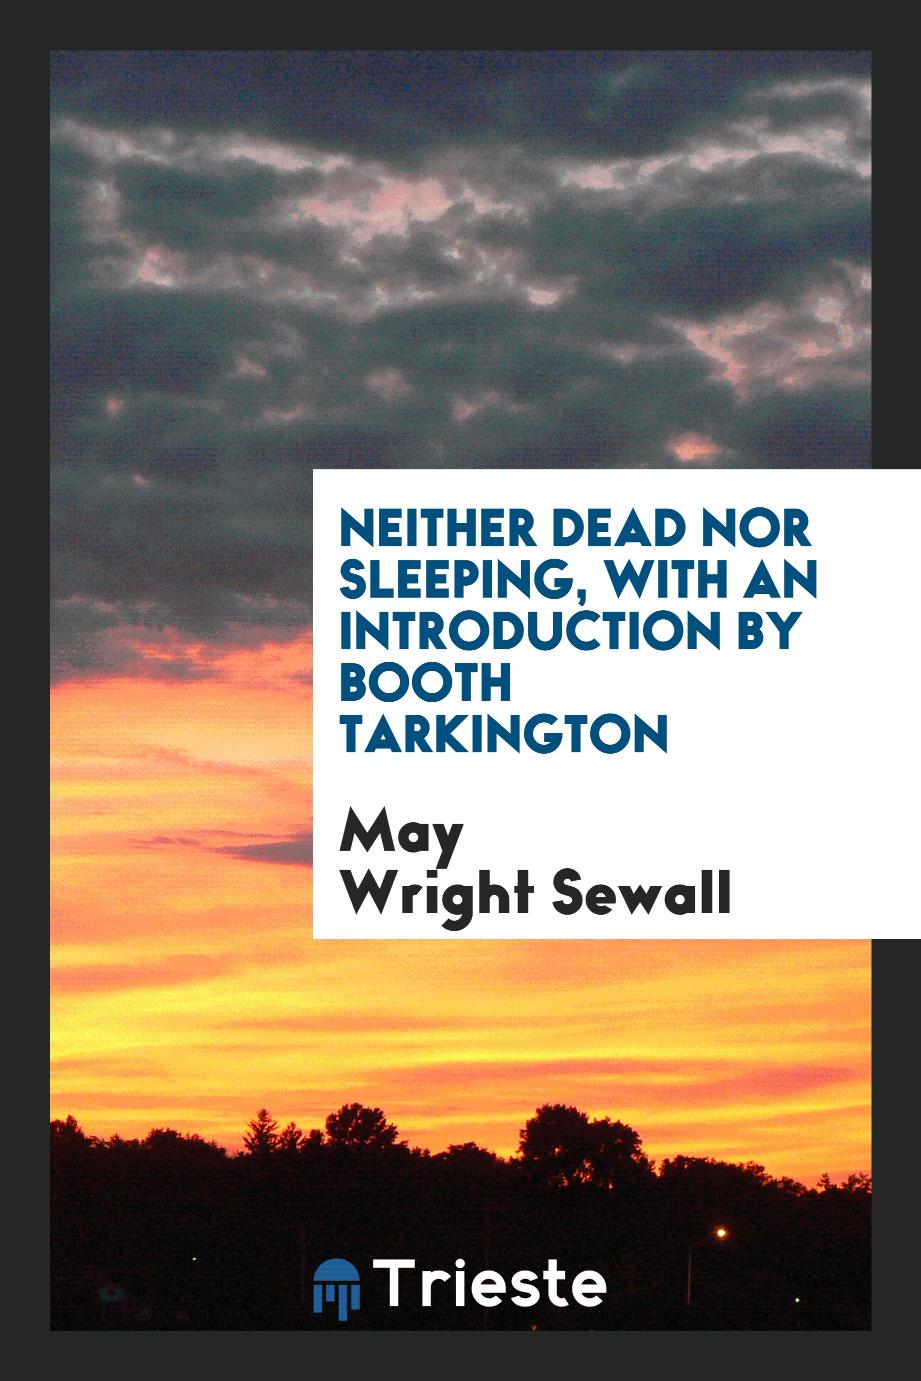 Neither Dead nor Sleeping, with an Introduction by Booth Tarkington